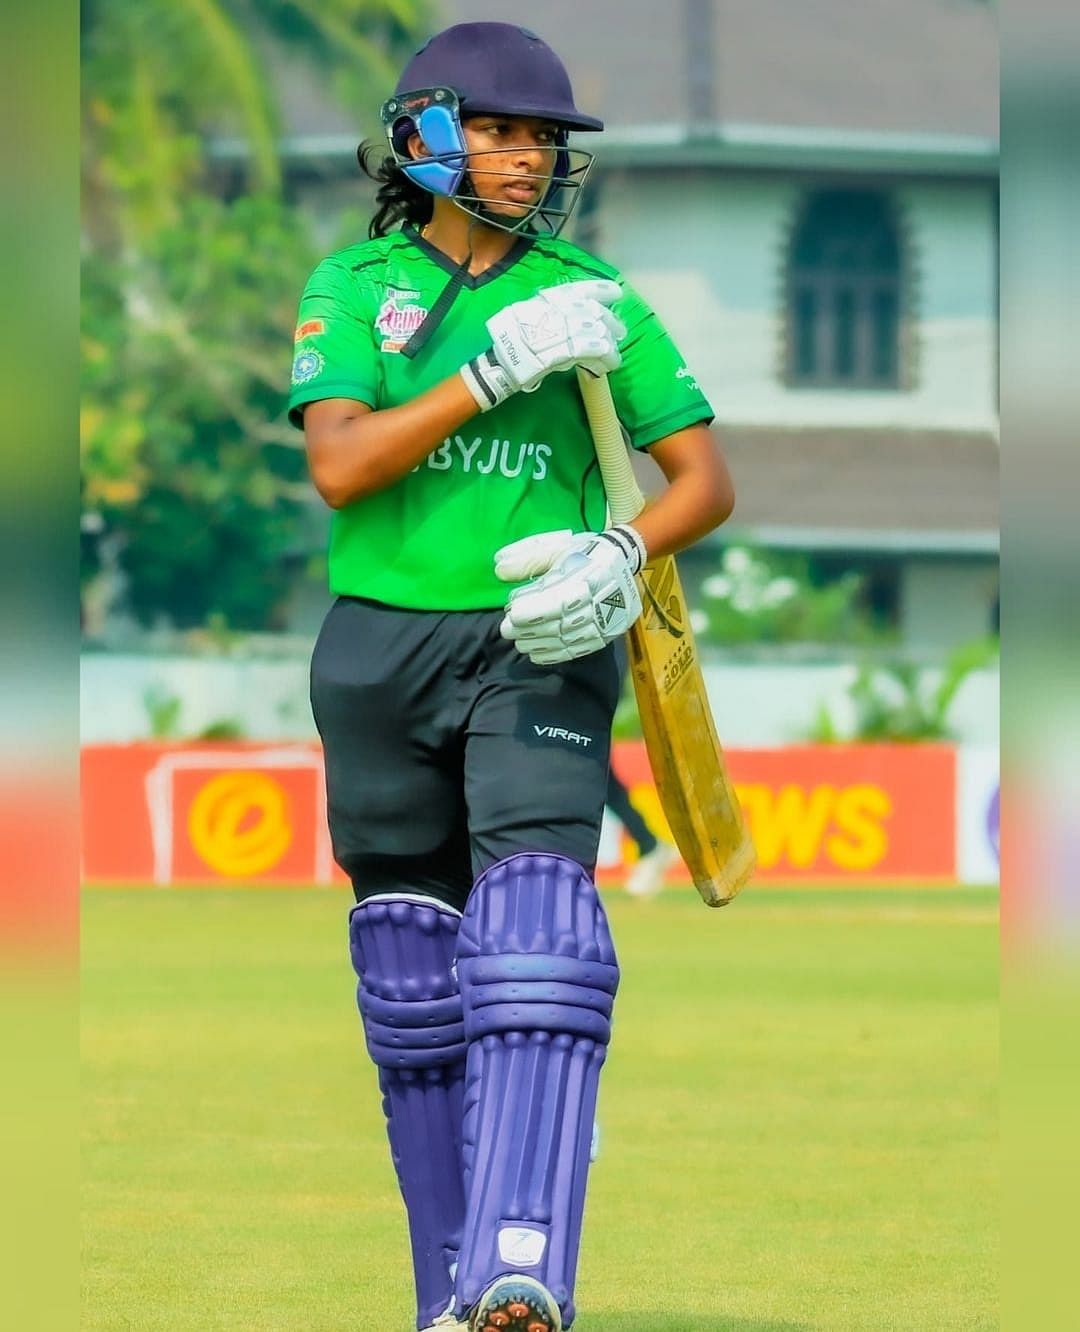 Meet Minnu Mani, the Only Player From Kerala in the Women's Premier League